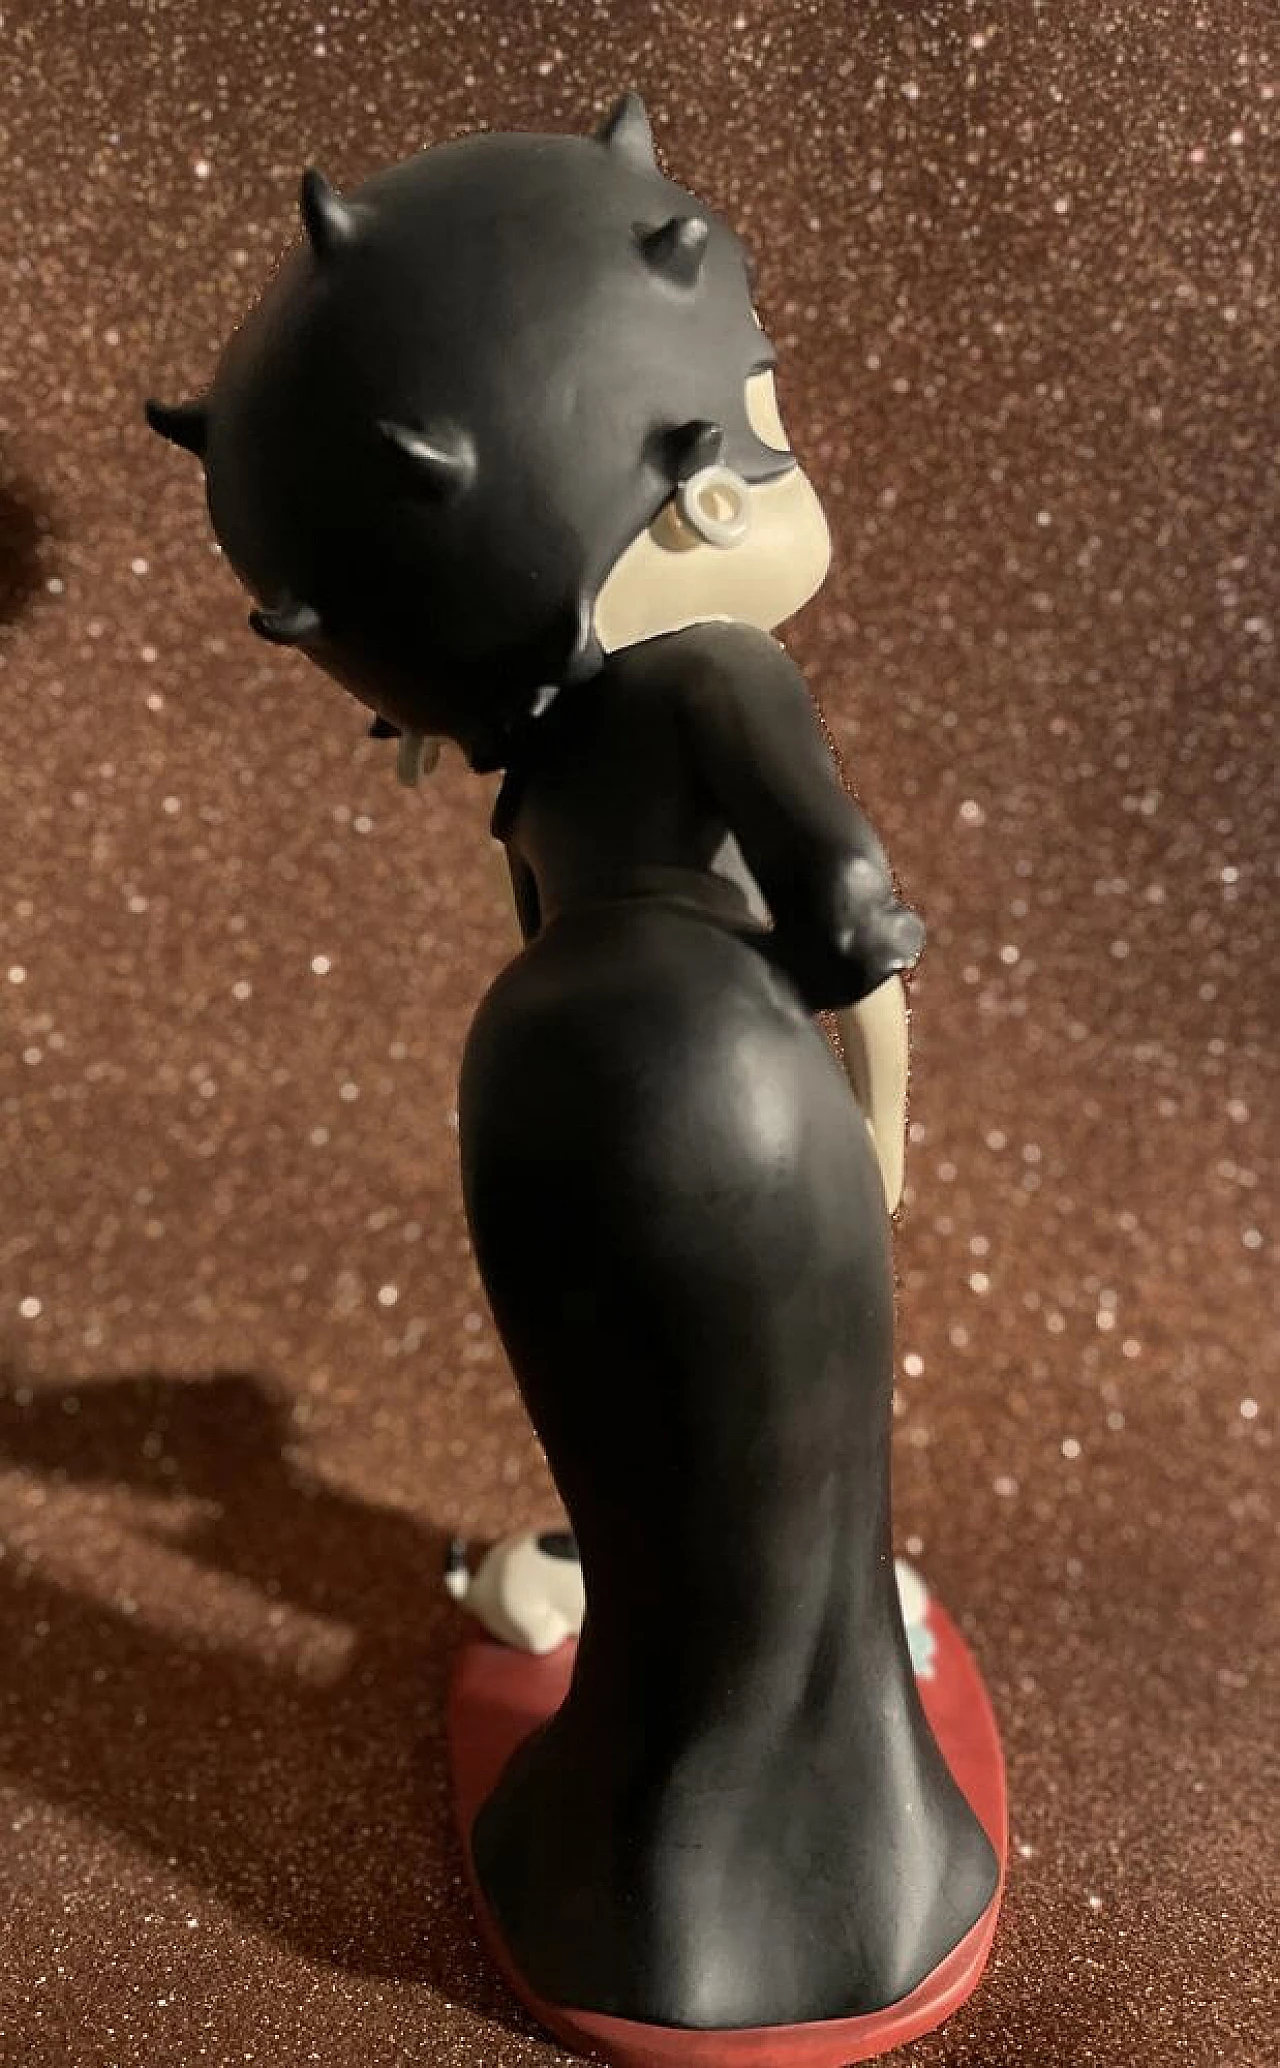 Betty Boop collectible figurine with black dress and small dog by Fleischer Studios, 2007 9